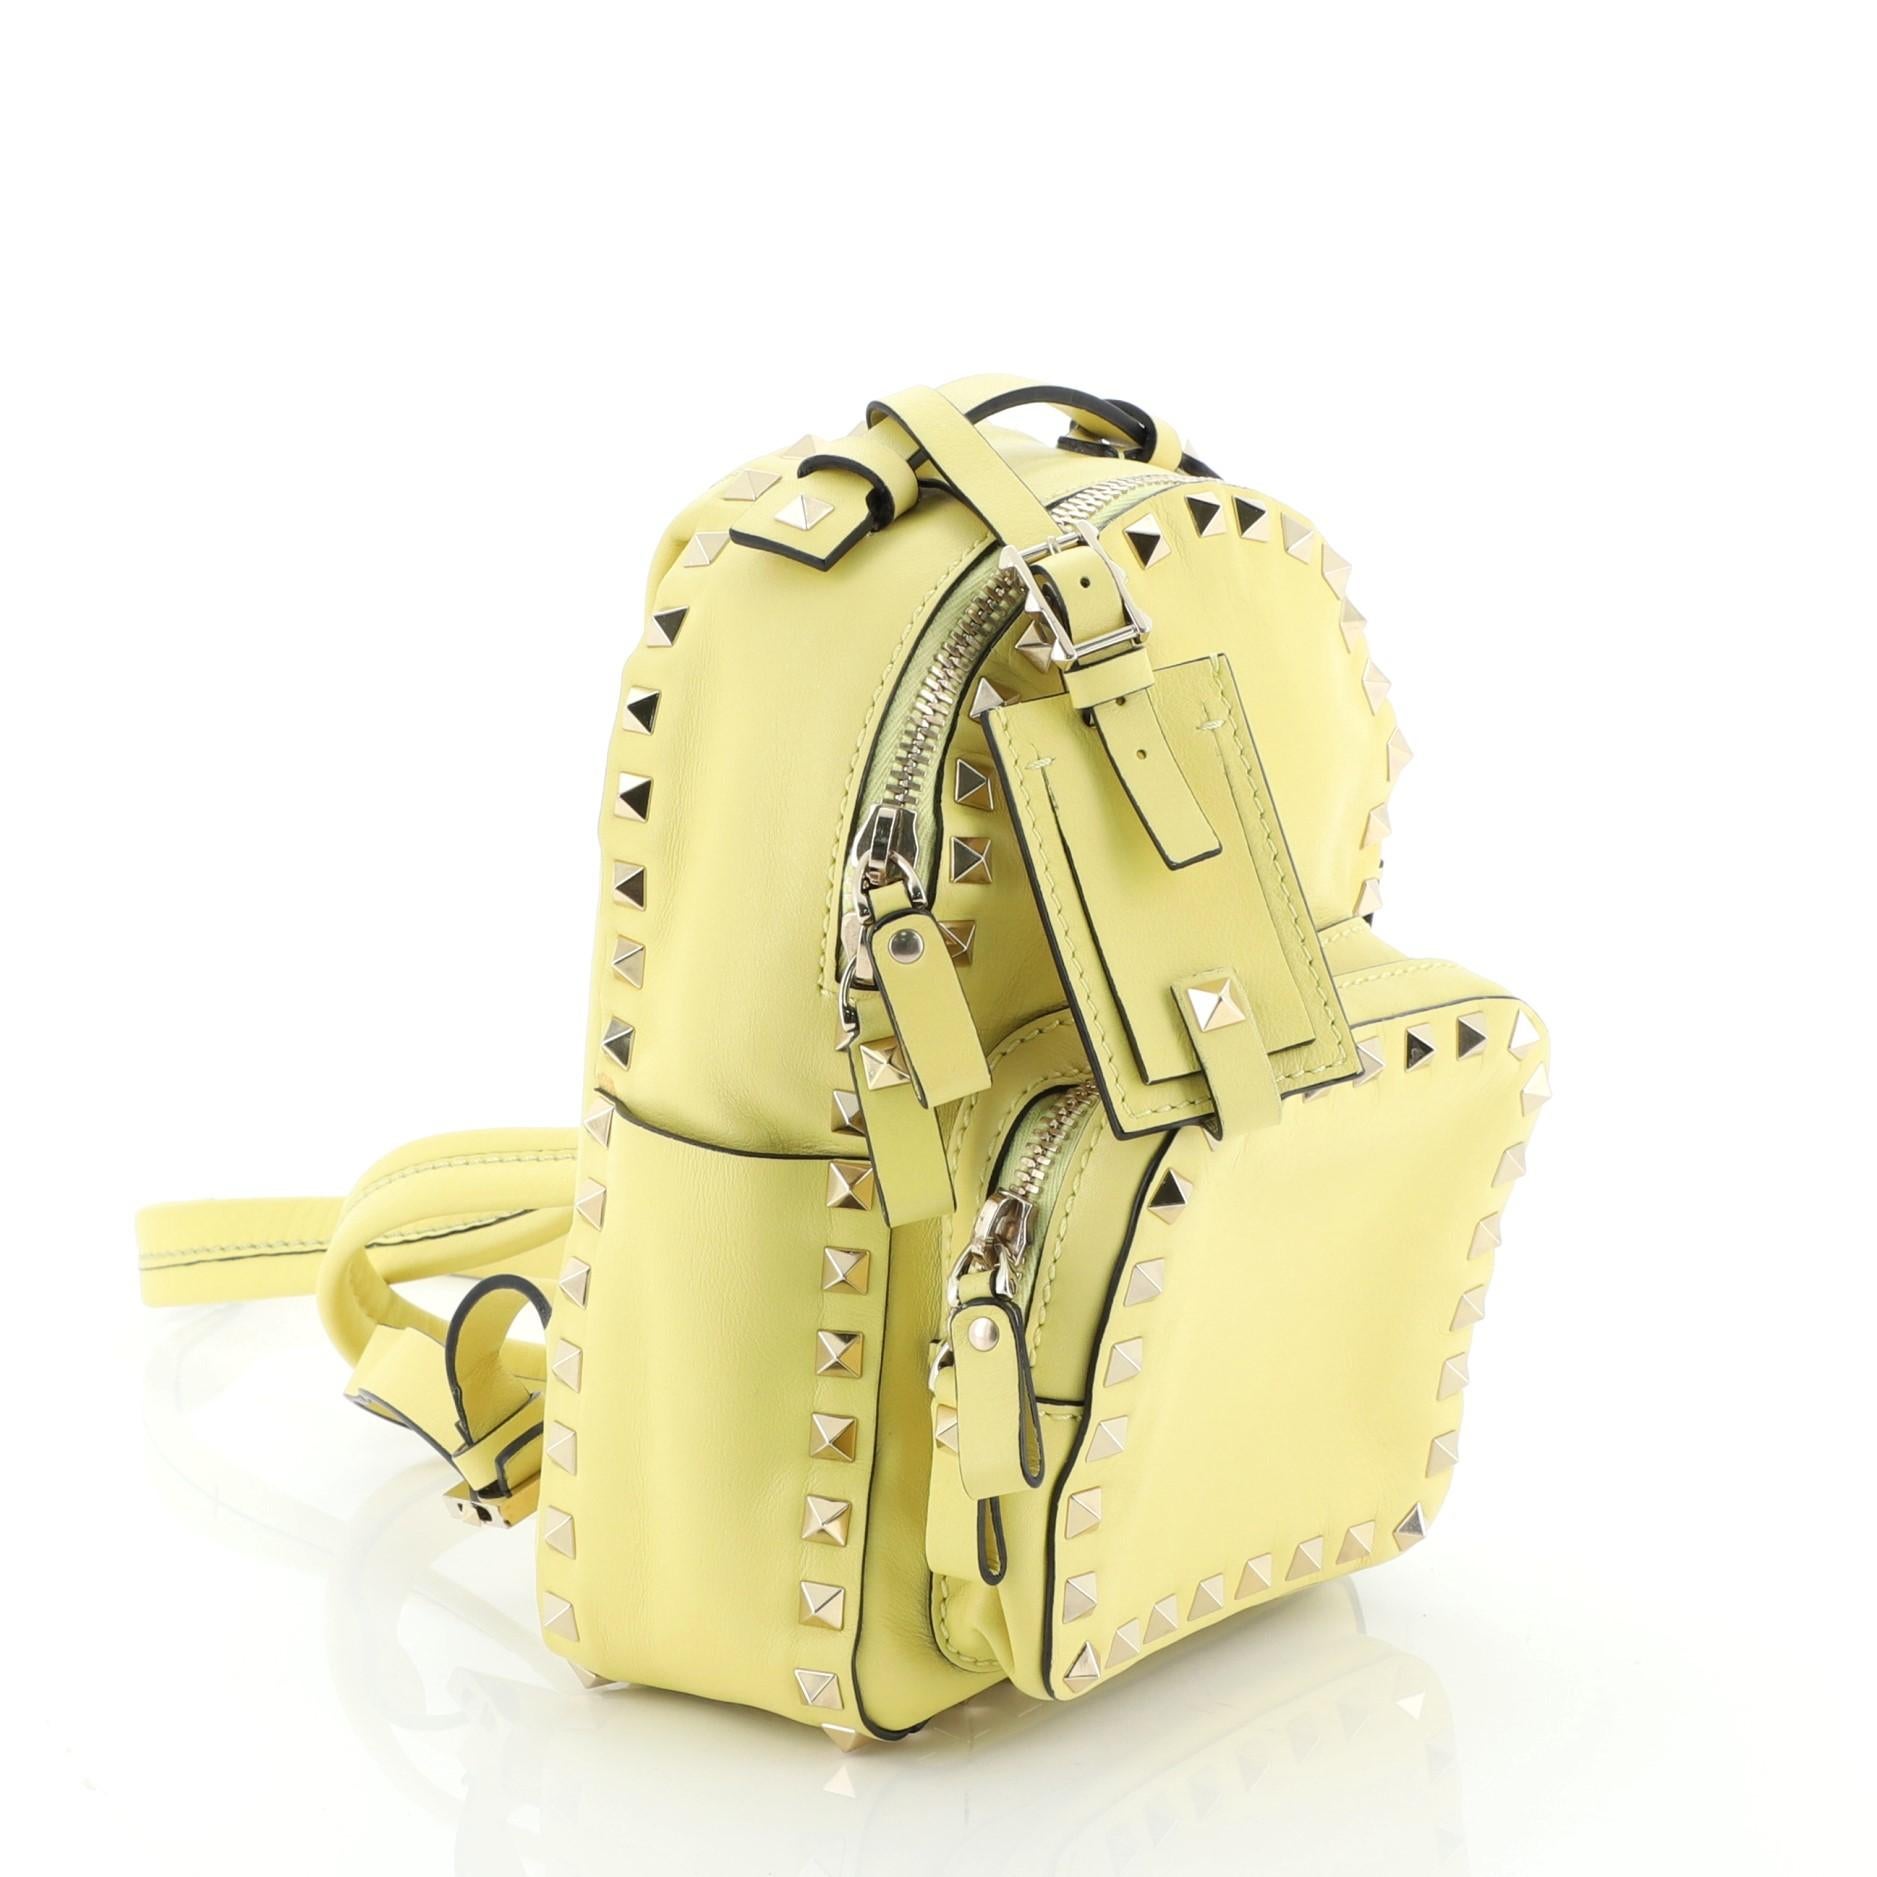 This Valentino Rockstud Backpack Leather Mini, crafted in yellow leather, features adjustable backpack straps, exterior front zip pocket, rockstud detailing and gold-tone hardware. Its zip closure opens to a neutral fabric interior. 

Estimated